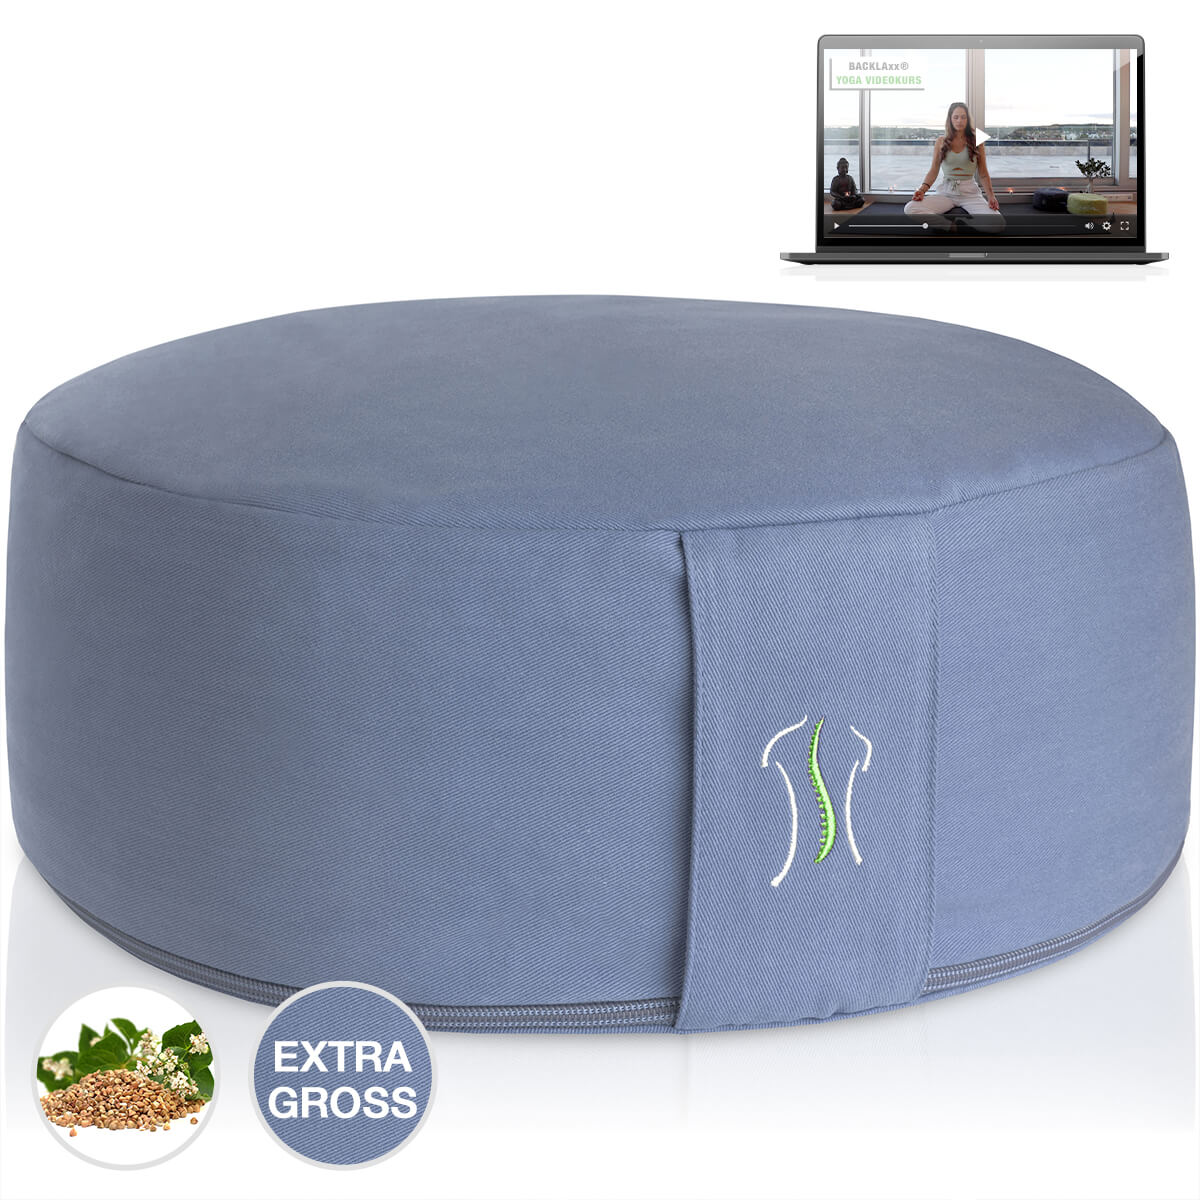 Meditation cushion (incl. free video course)